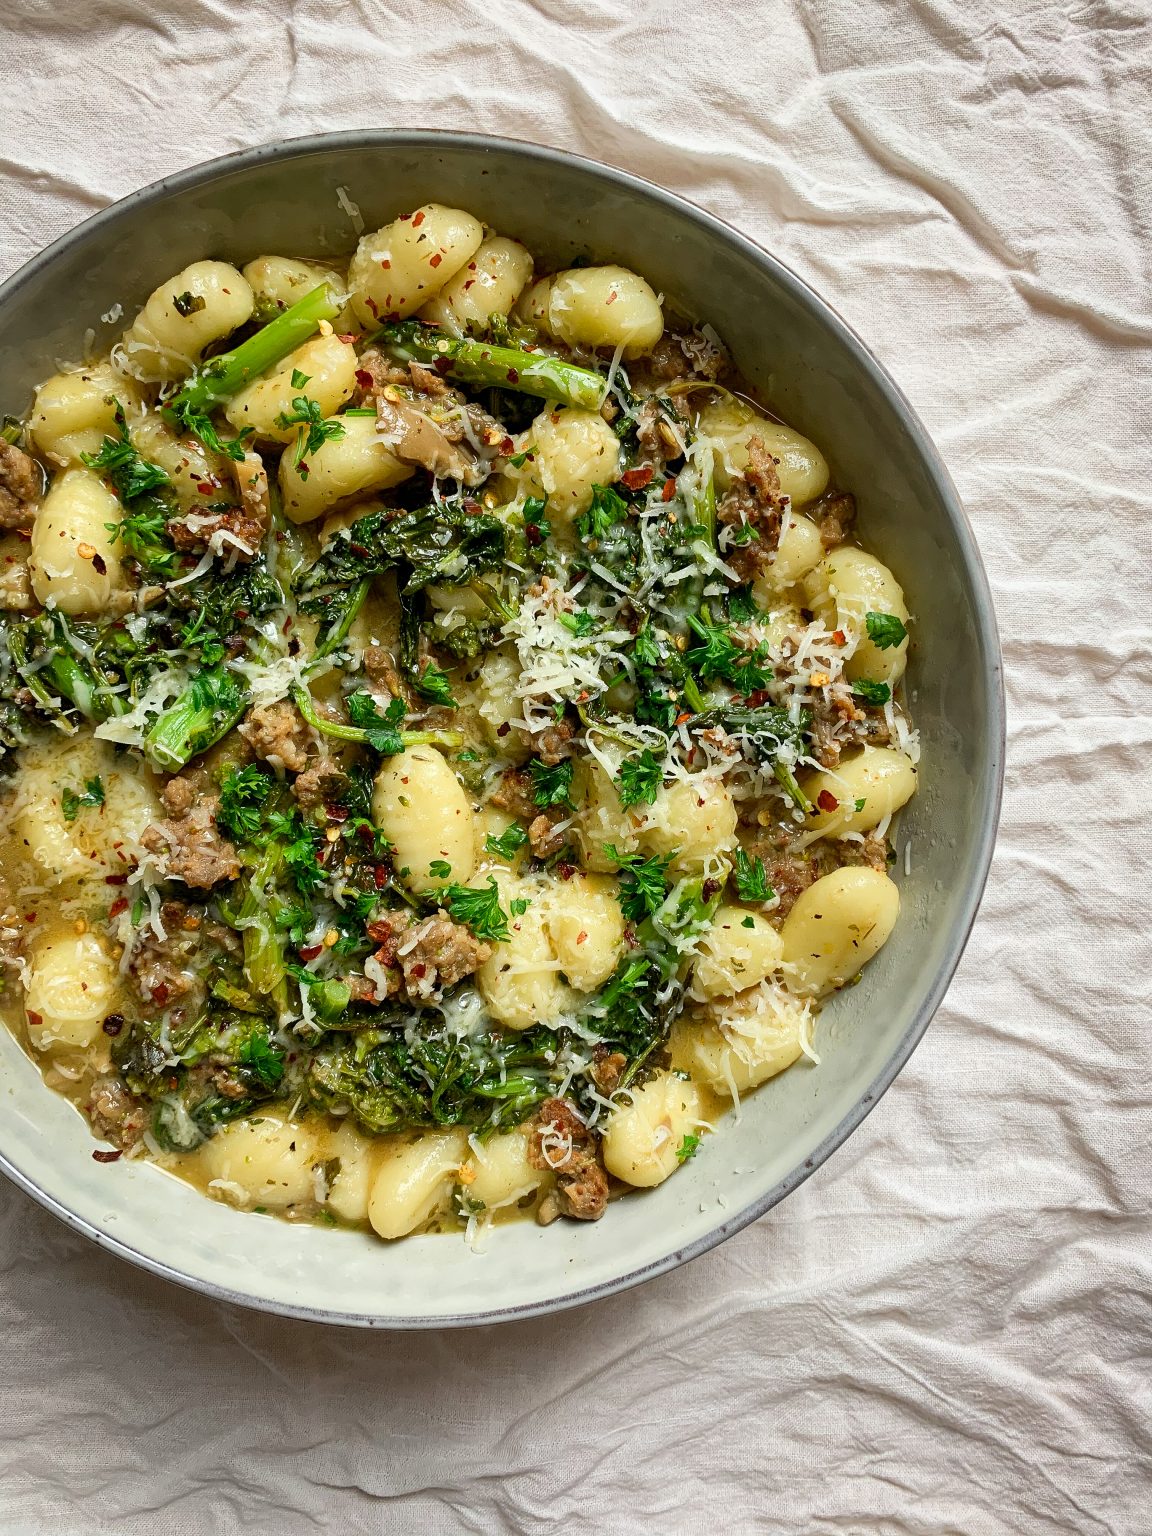 Lemon Butter Gnocchi with Spicy Sausage, Broccoli Rabe and Mushrooms ...